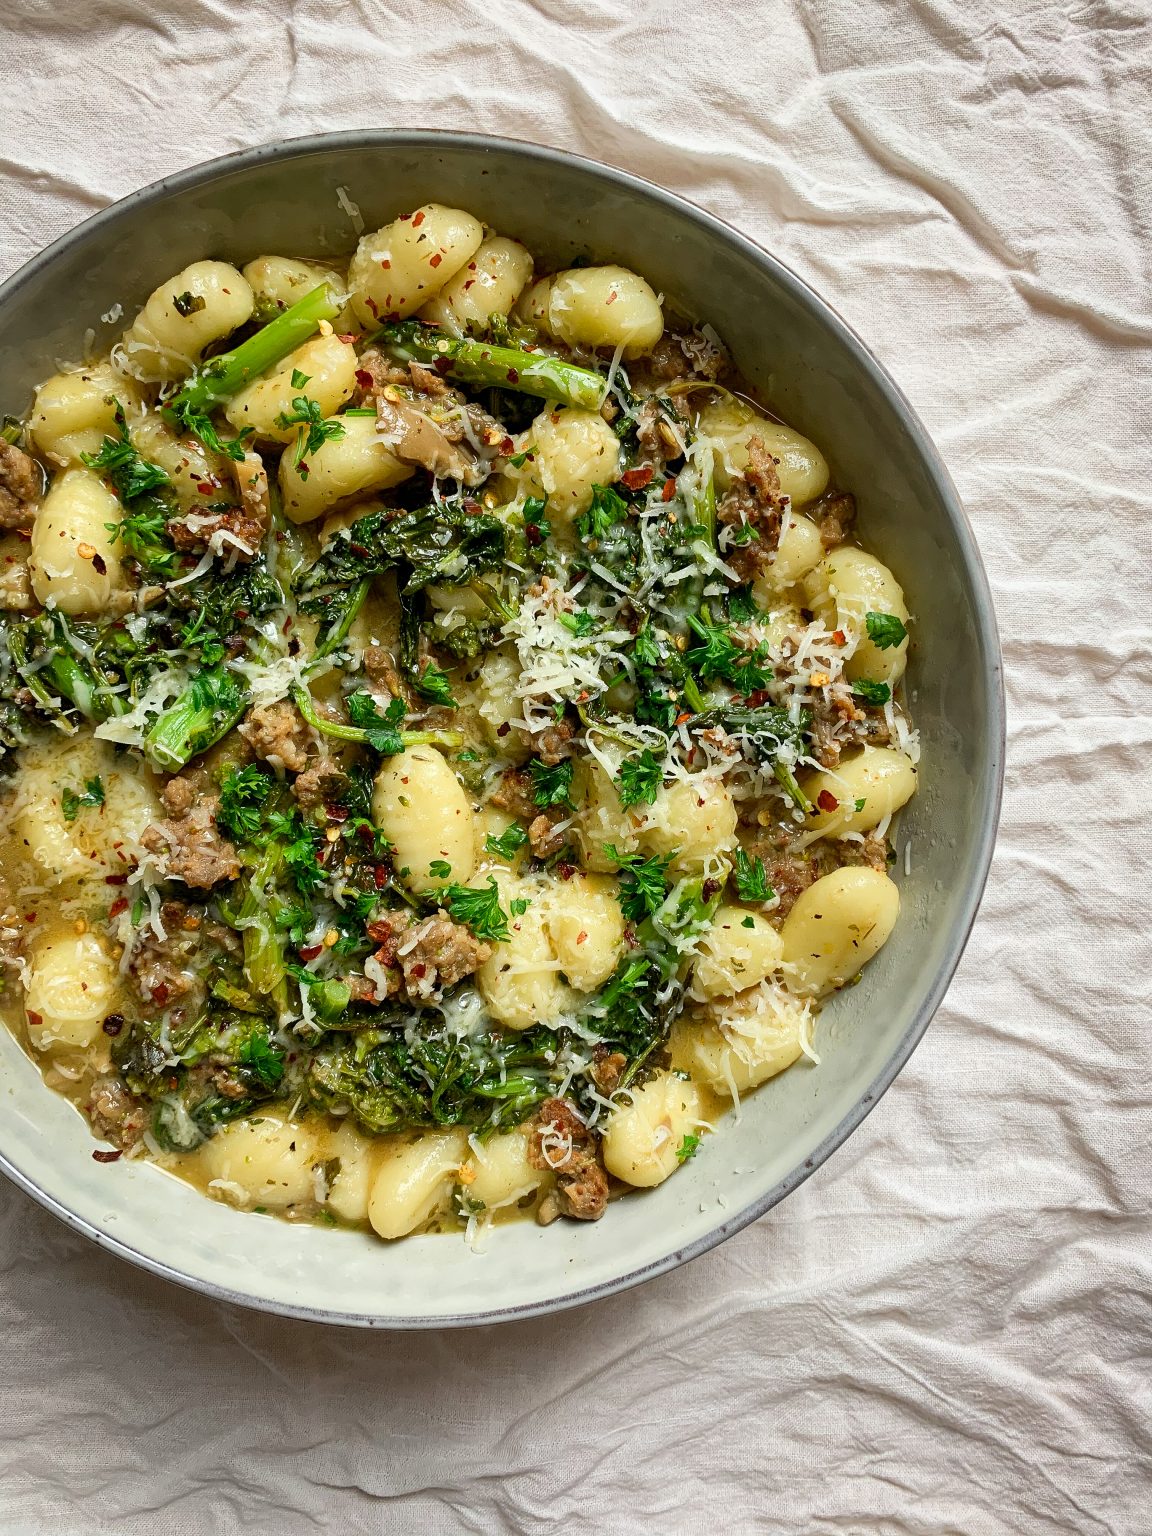 Lemon Butter Gnocchi with Spicy Sausage, Broccoli Rabe and Mushrooms ...